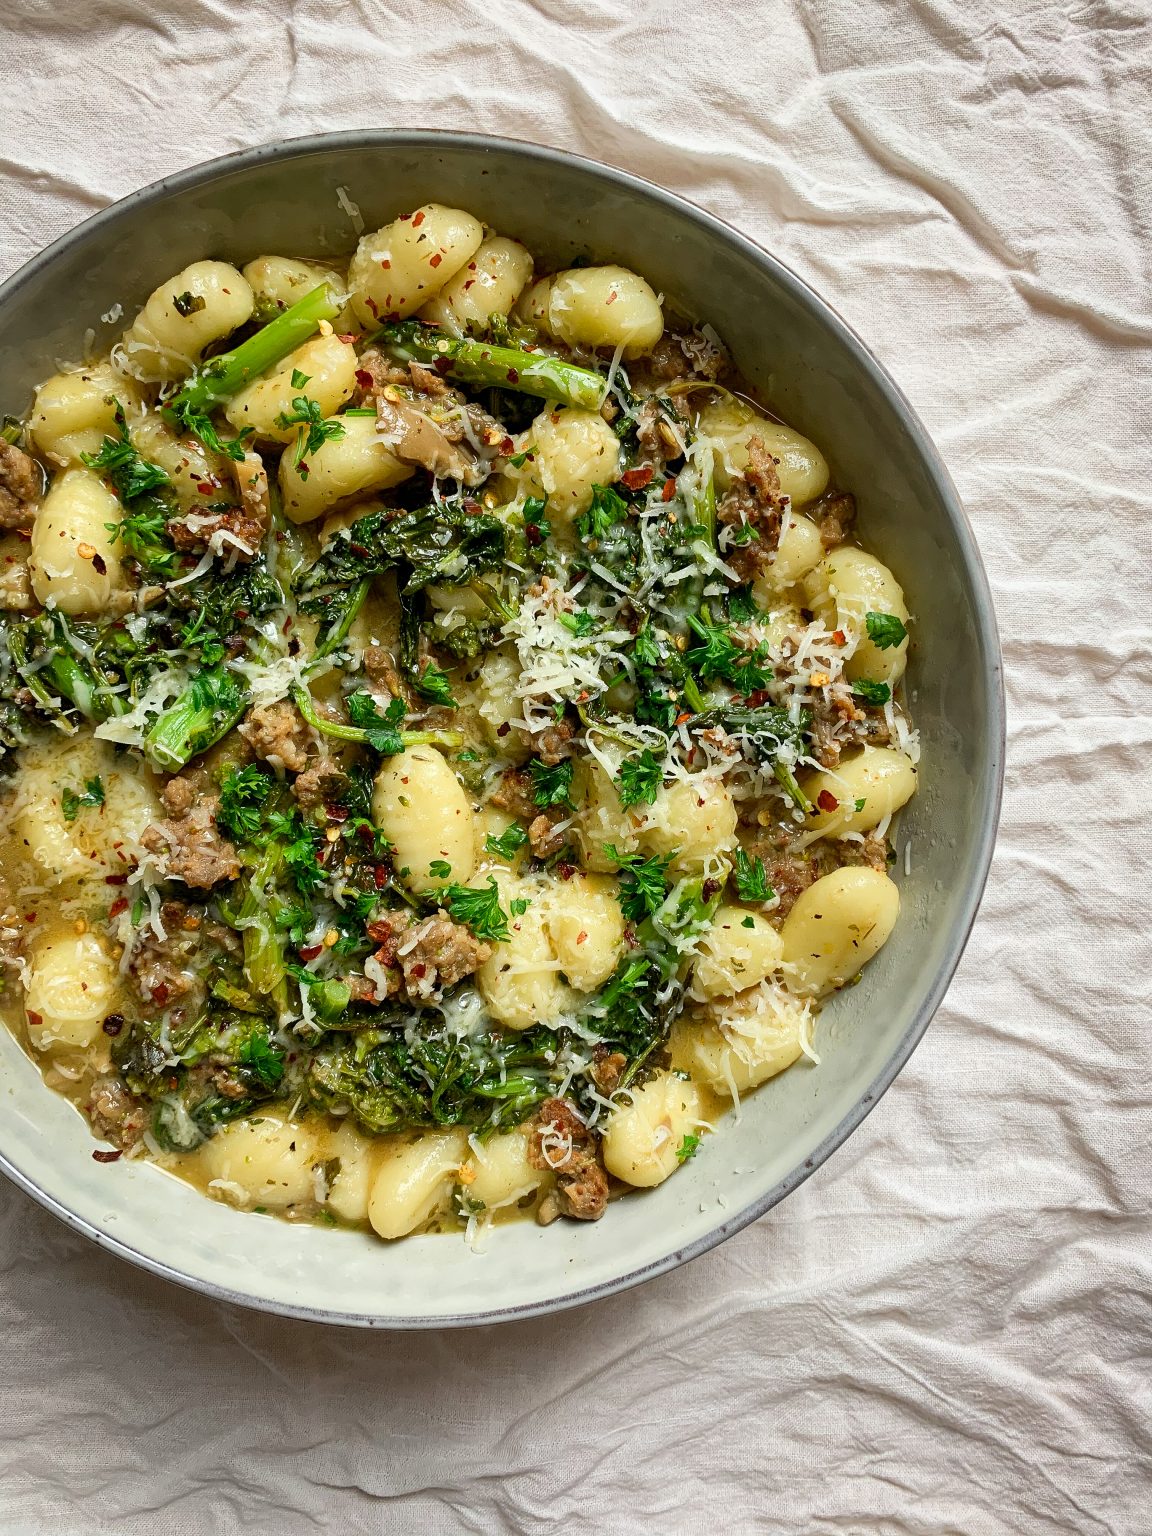 Lemon Butter Gnocchi with Spicy Sausage, Broccoli Rabe and Mushrooms ...